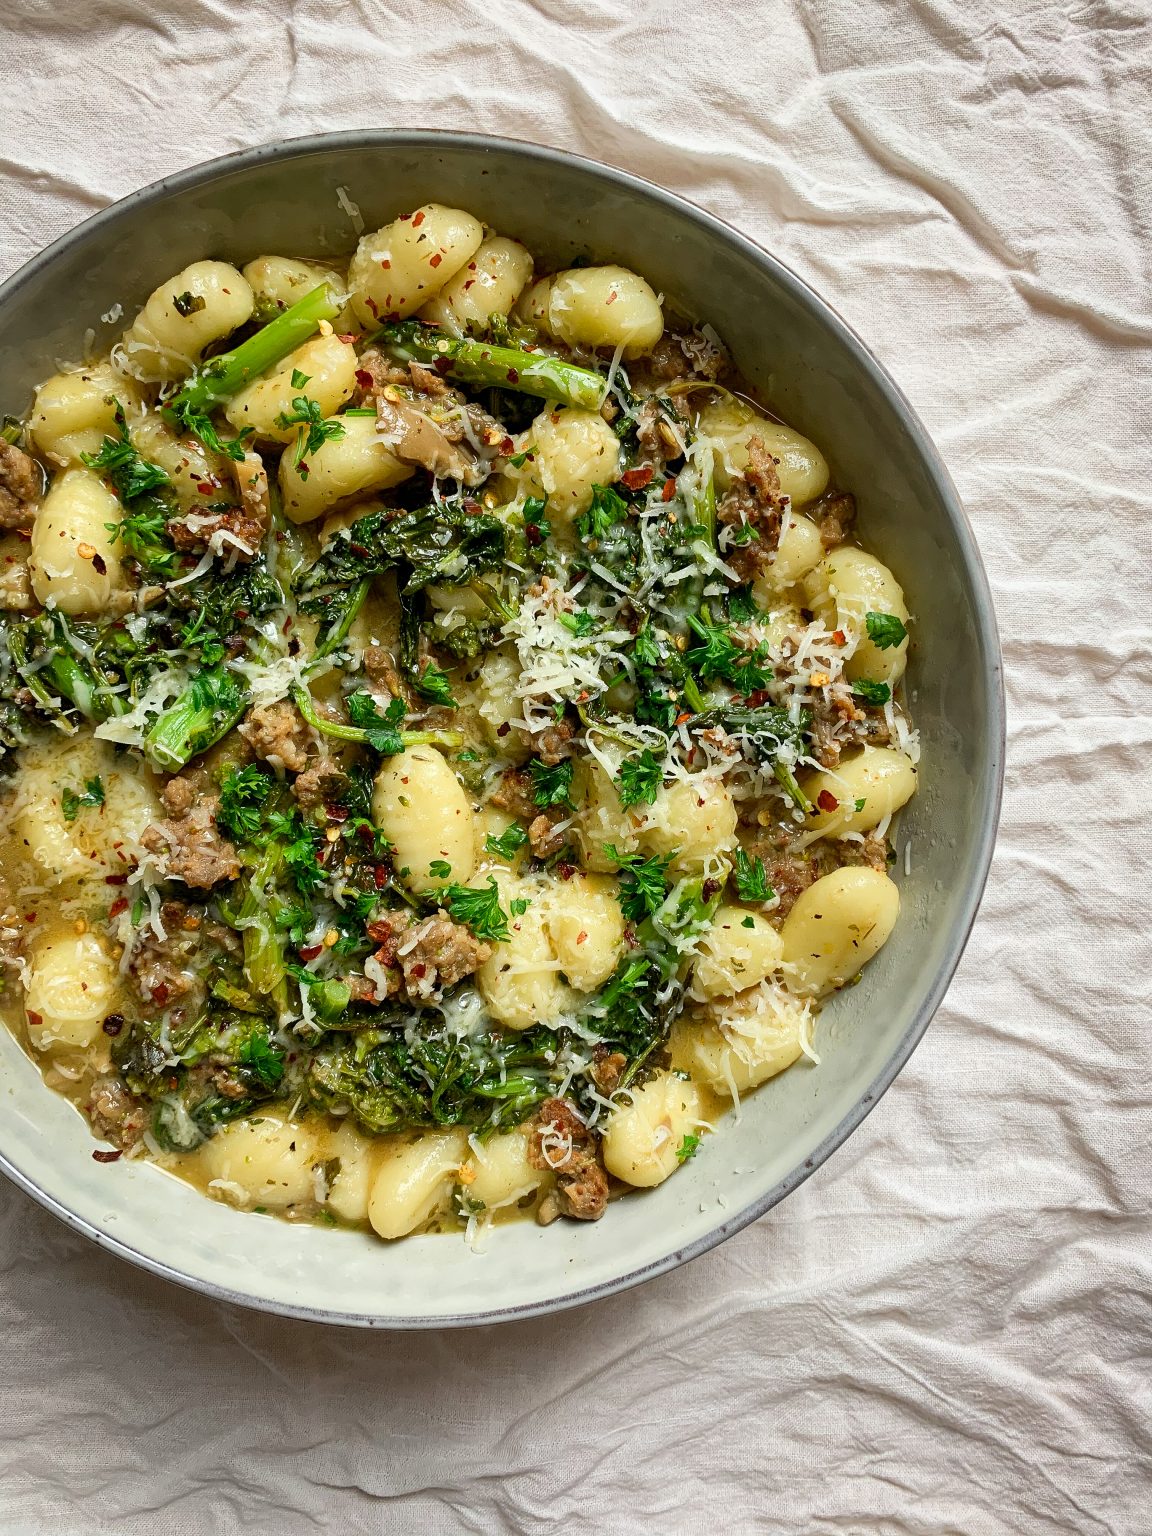 Lemon Butter Gnocchi with Spicy Sausage, Broccoli Rabe and Mushrooms ...